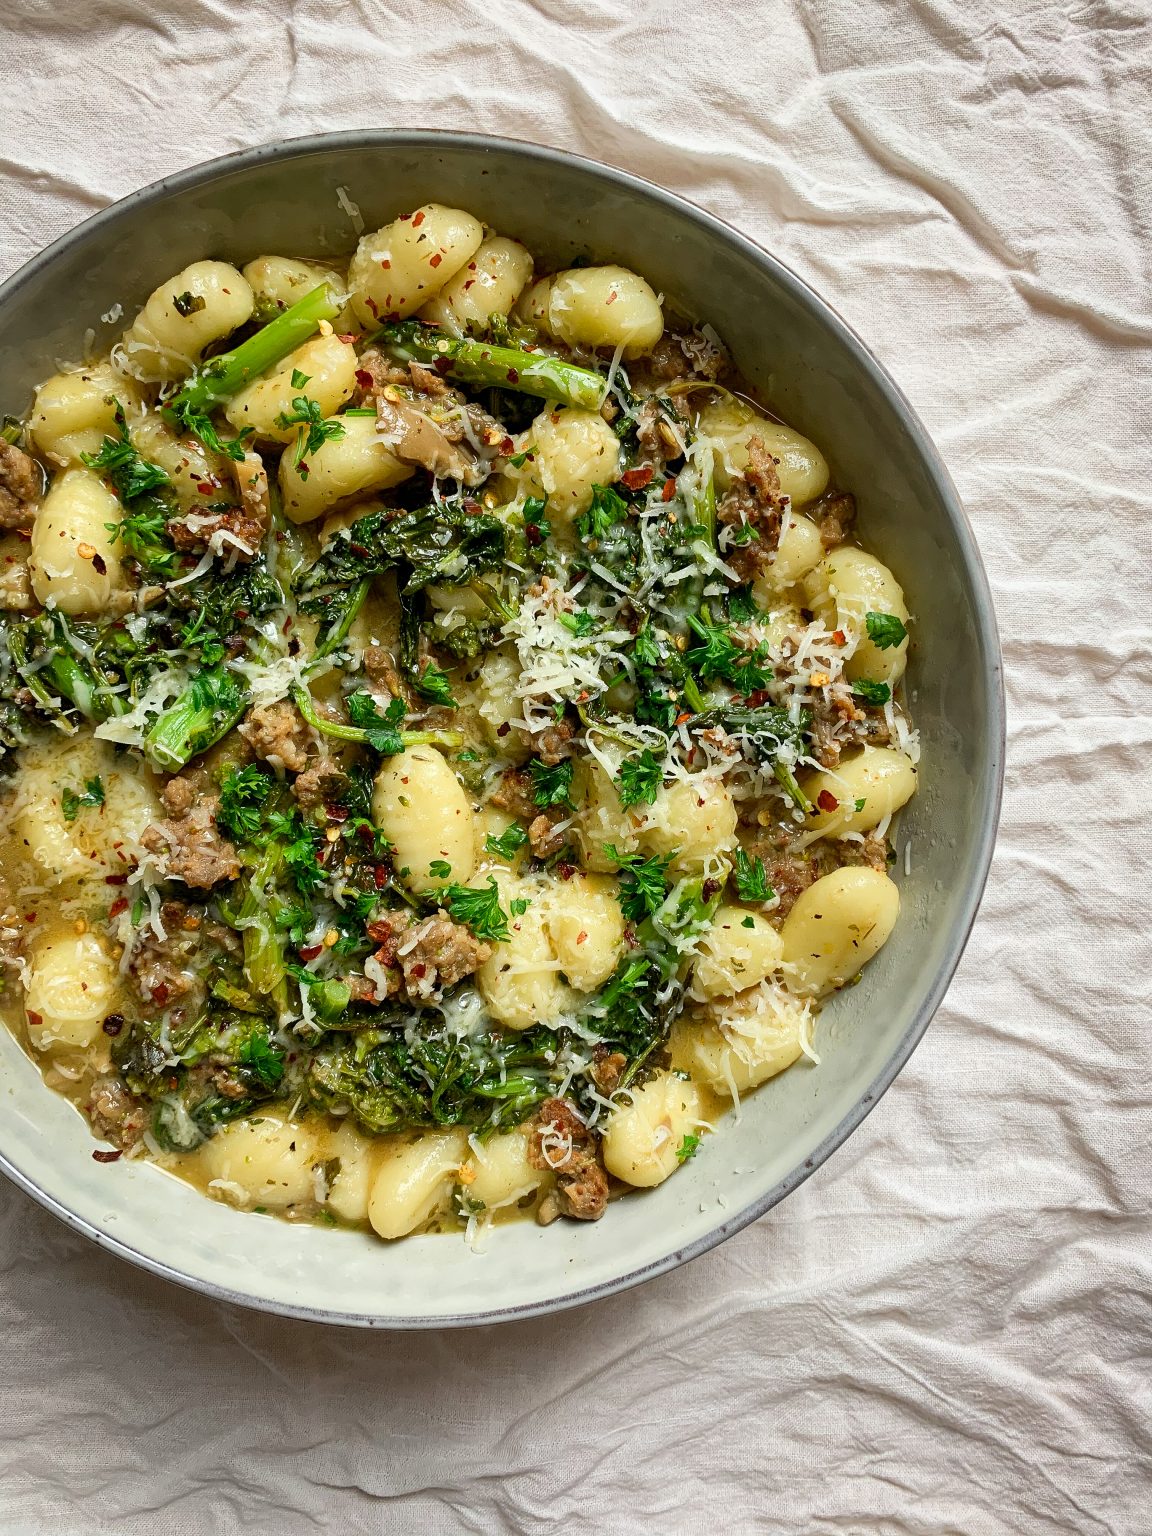 Lemon Butter Gnocchi with Spicy Sausage, Broccoli Rabe and Mushrooms ...